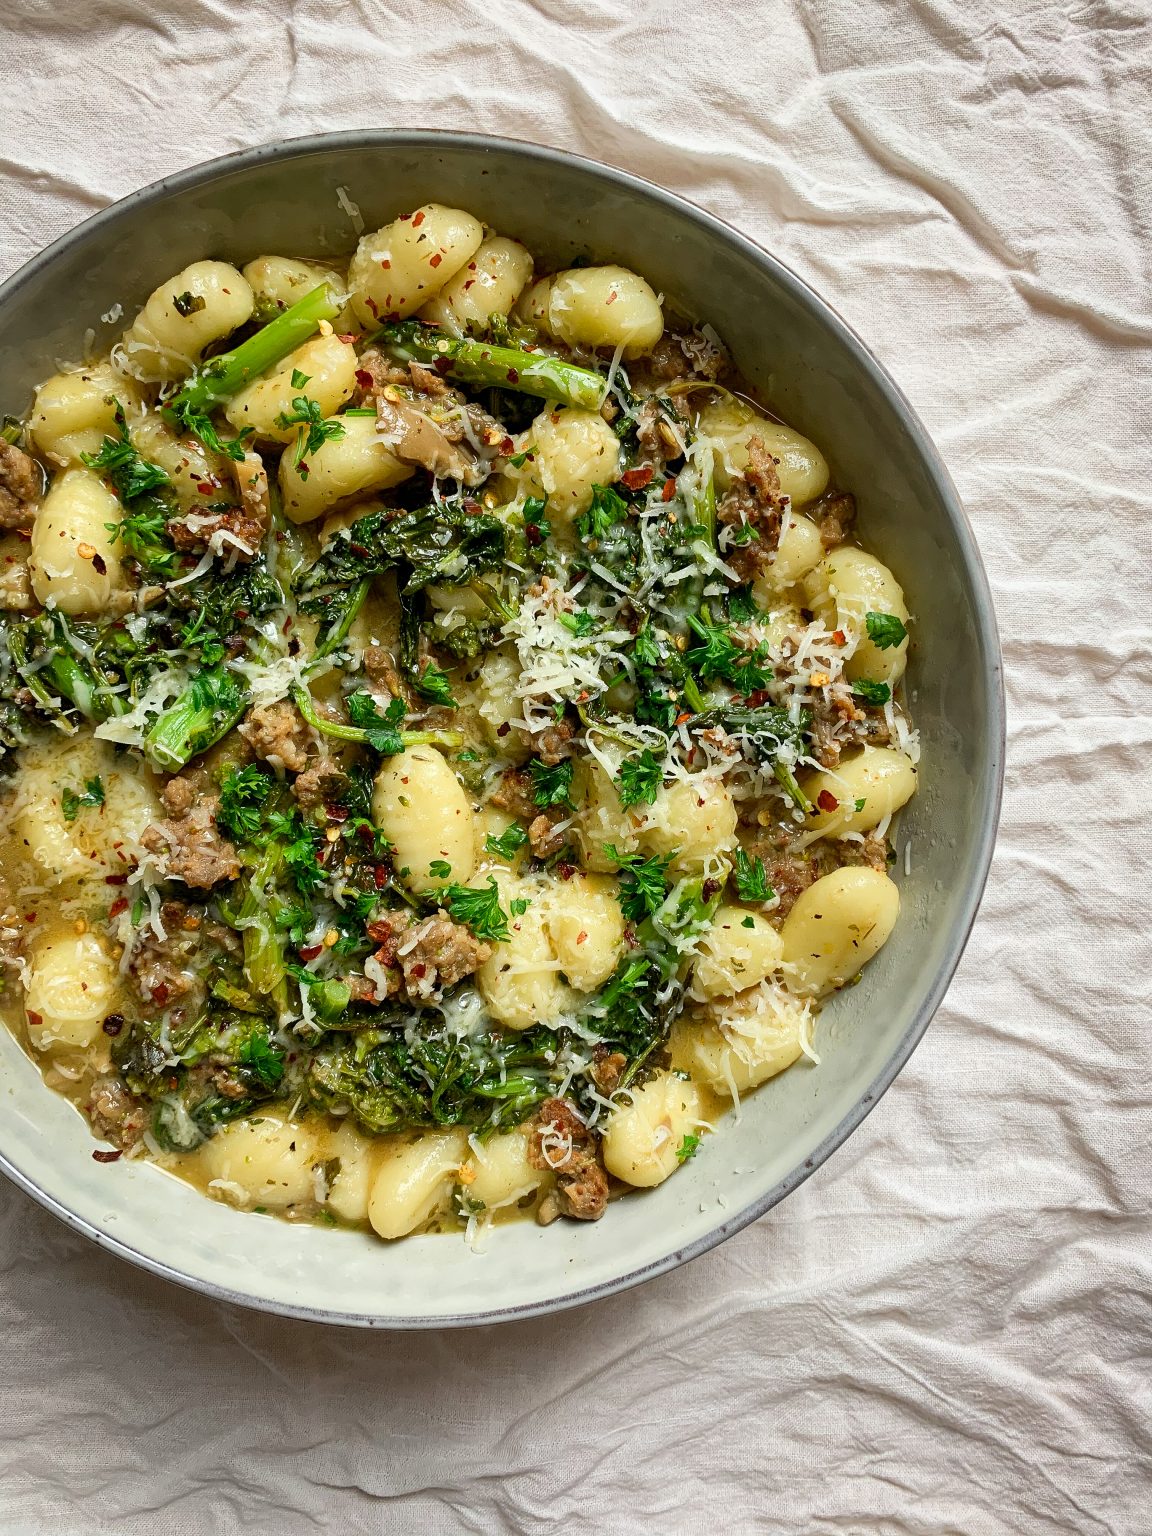 Lemon Butter Gnocchi with Spicy Sausage, Broccoli Rabe and Mushrooms ...